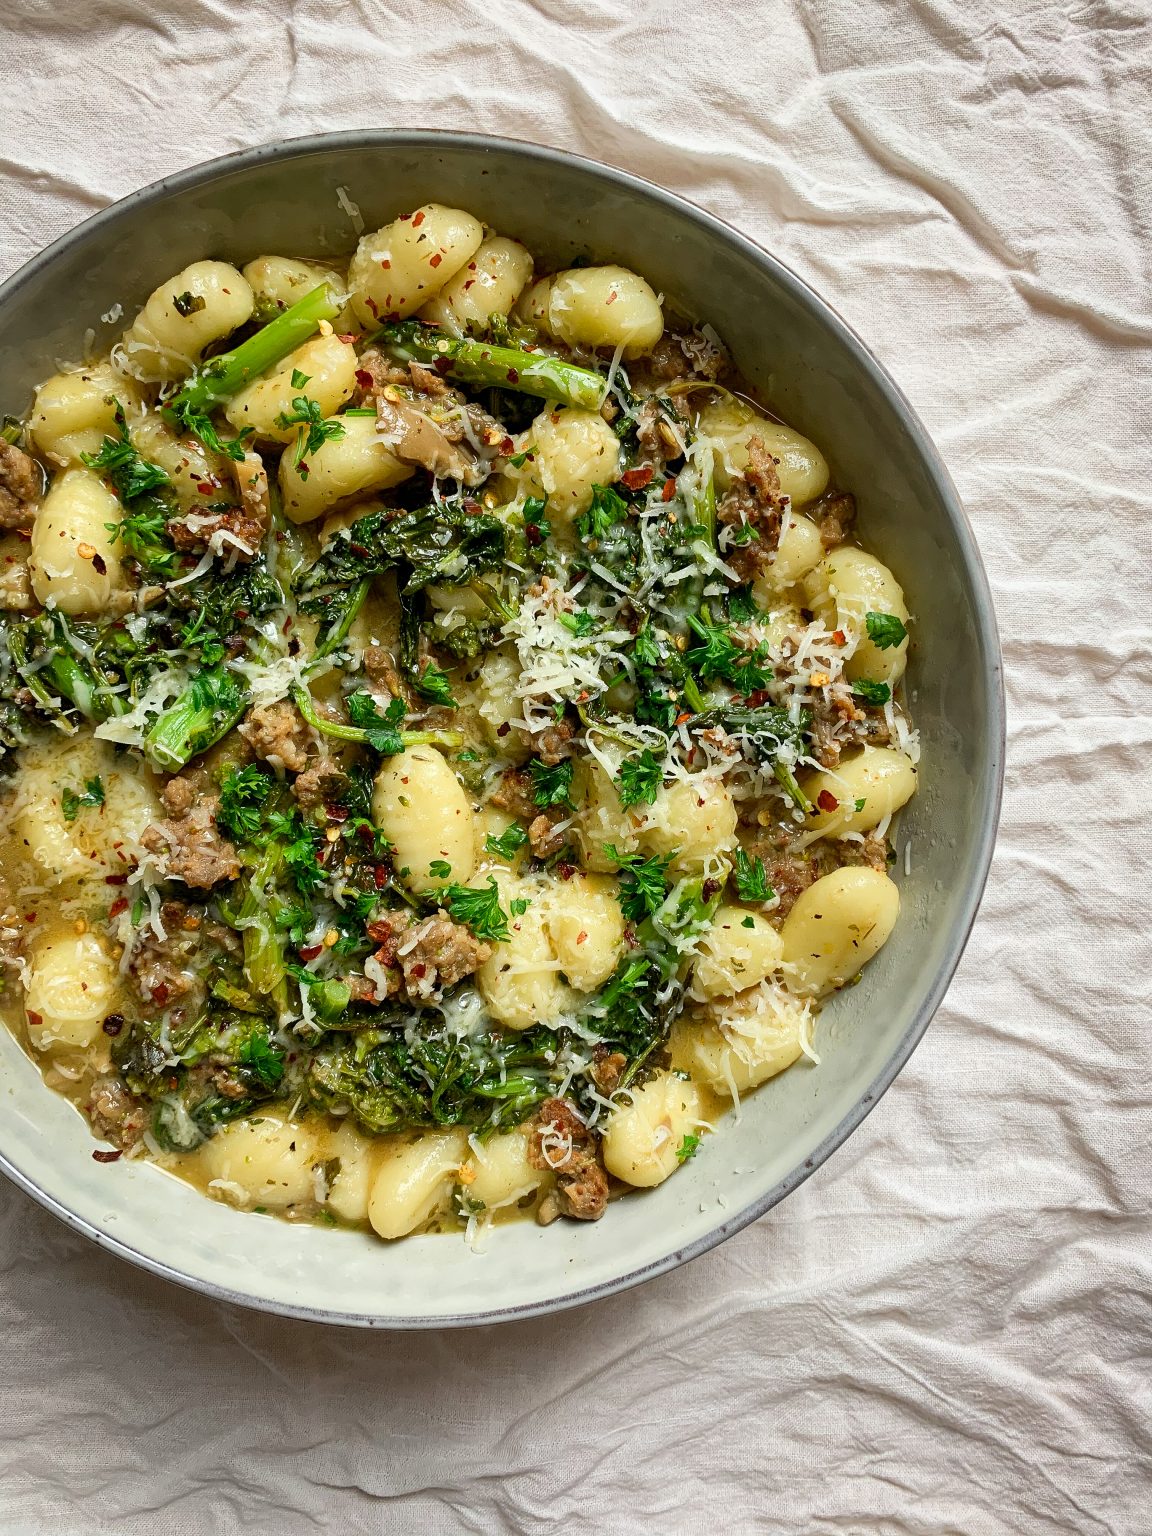 Lemon Butter Gnocchi with Spicy Sausage, Broccoli Rabe and Mushrooms ...